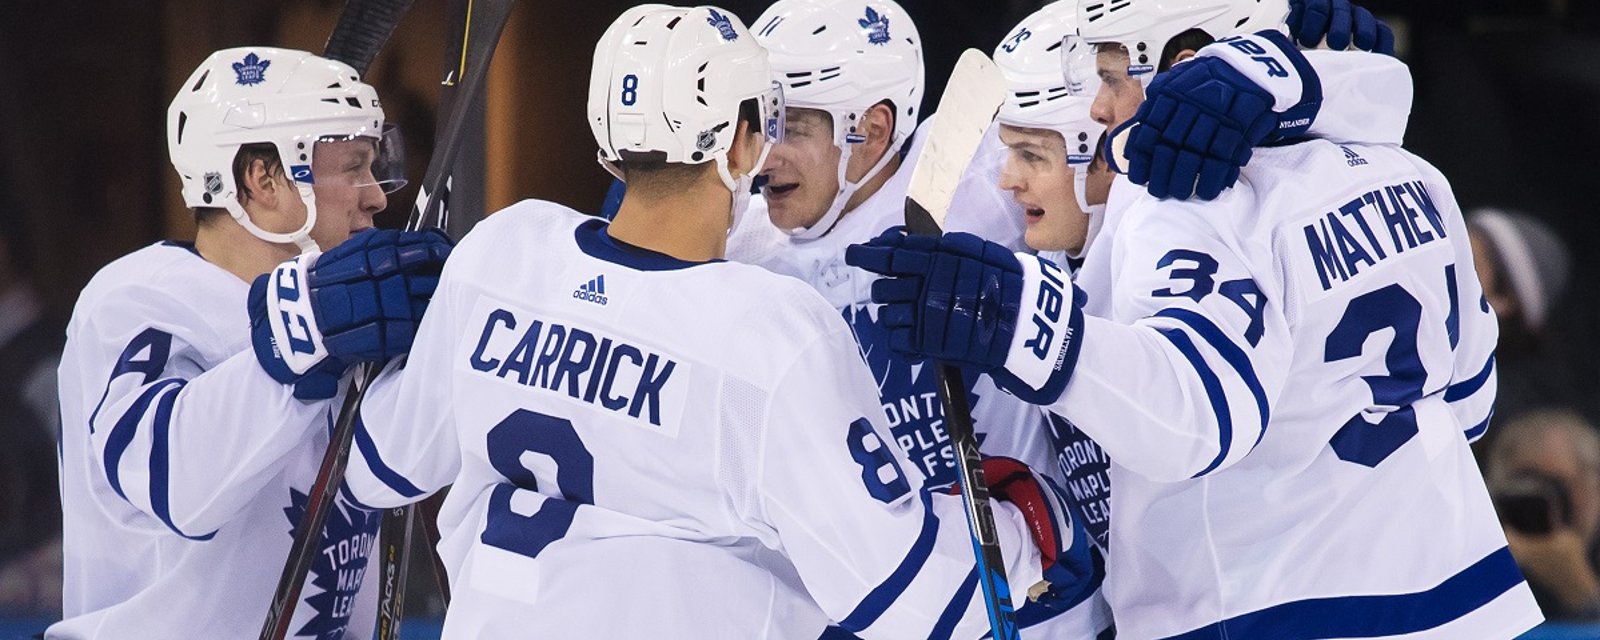 Maple Leafs actively shopping one of their players just days before the regular season.